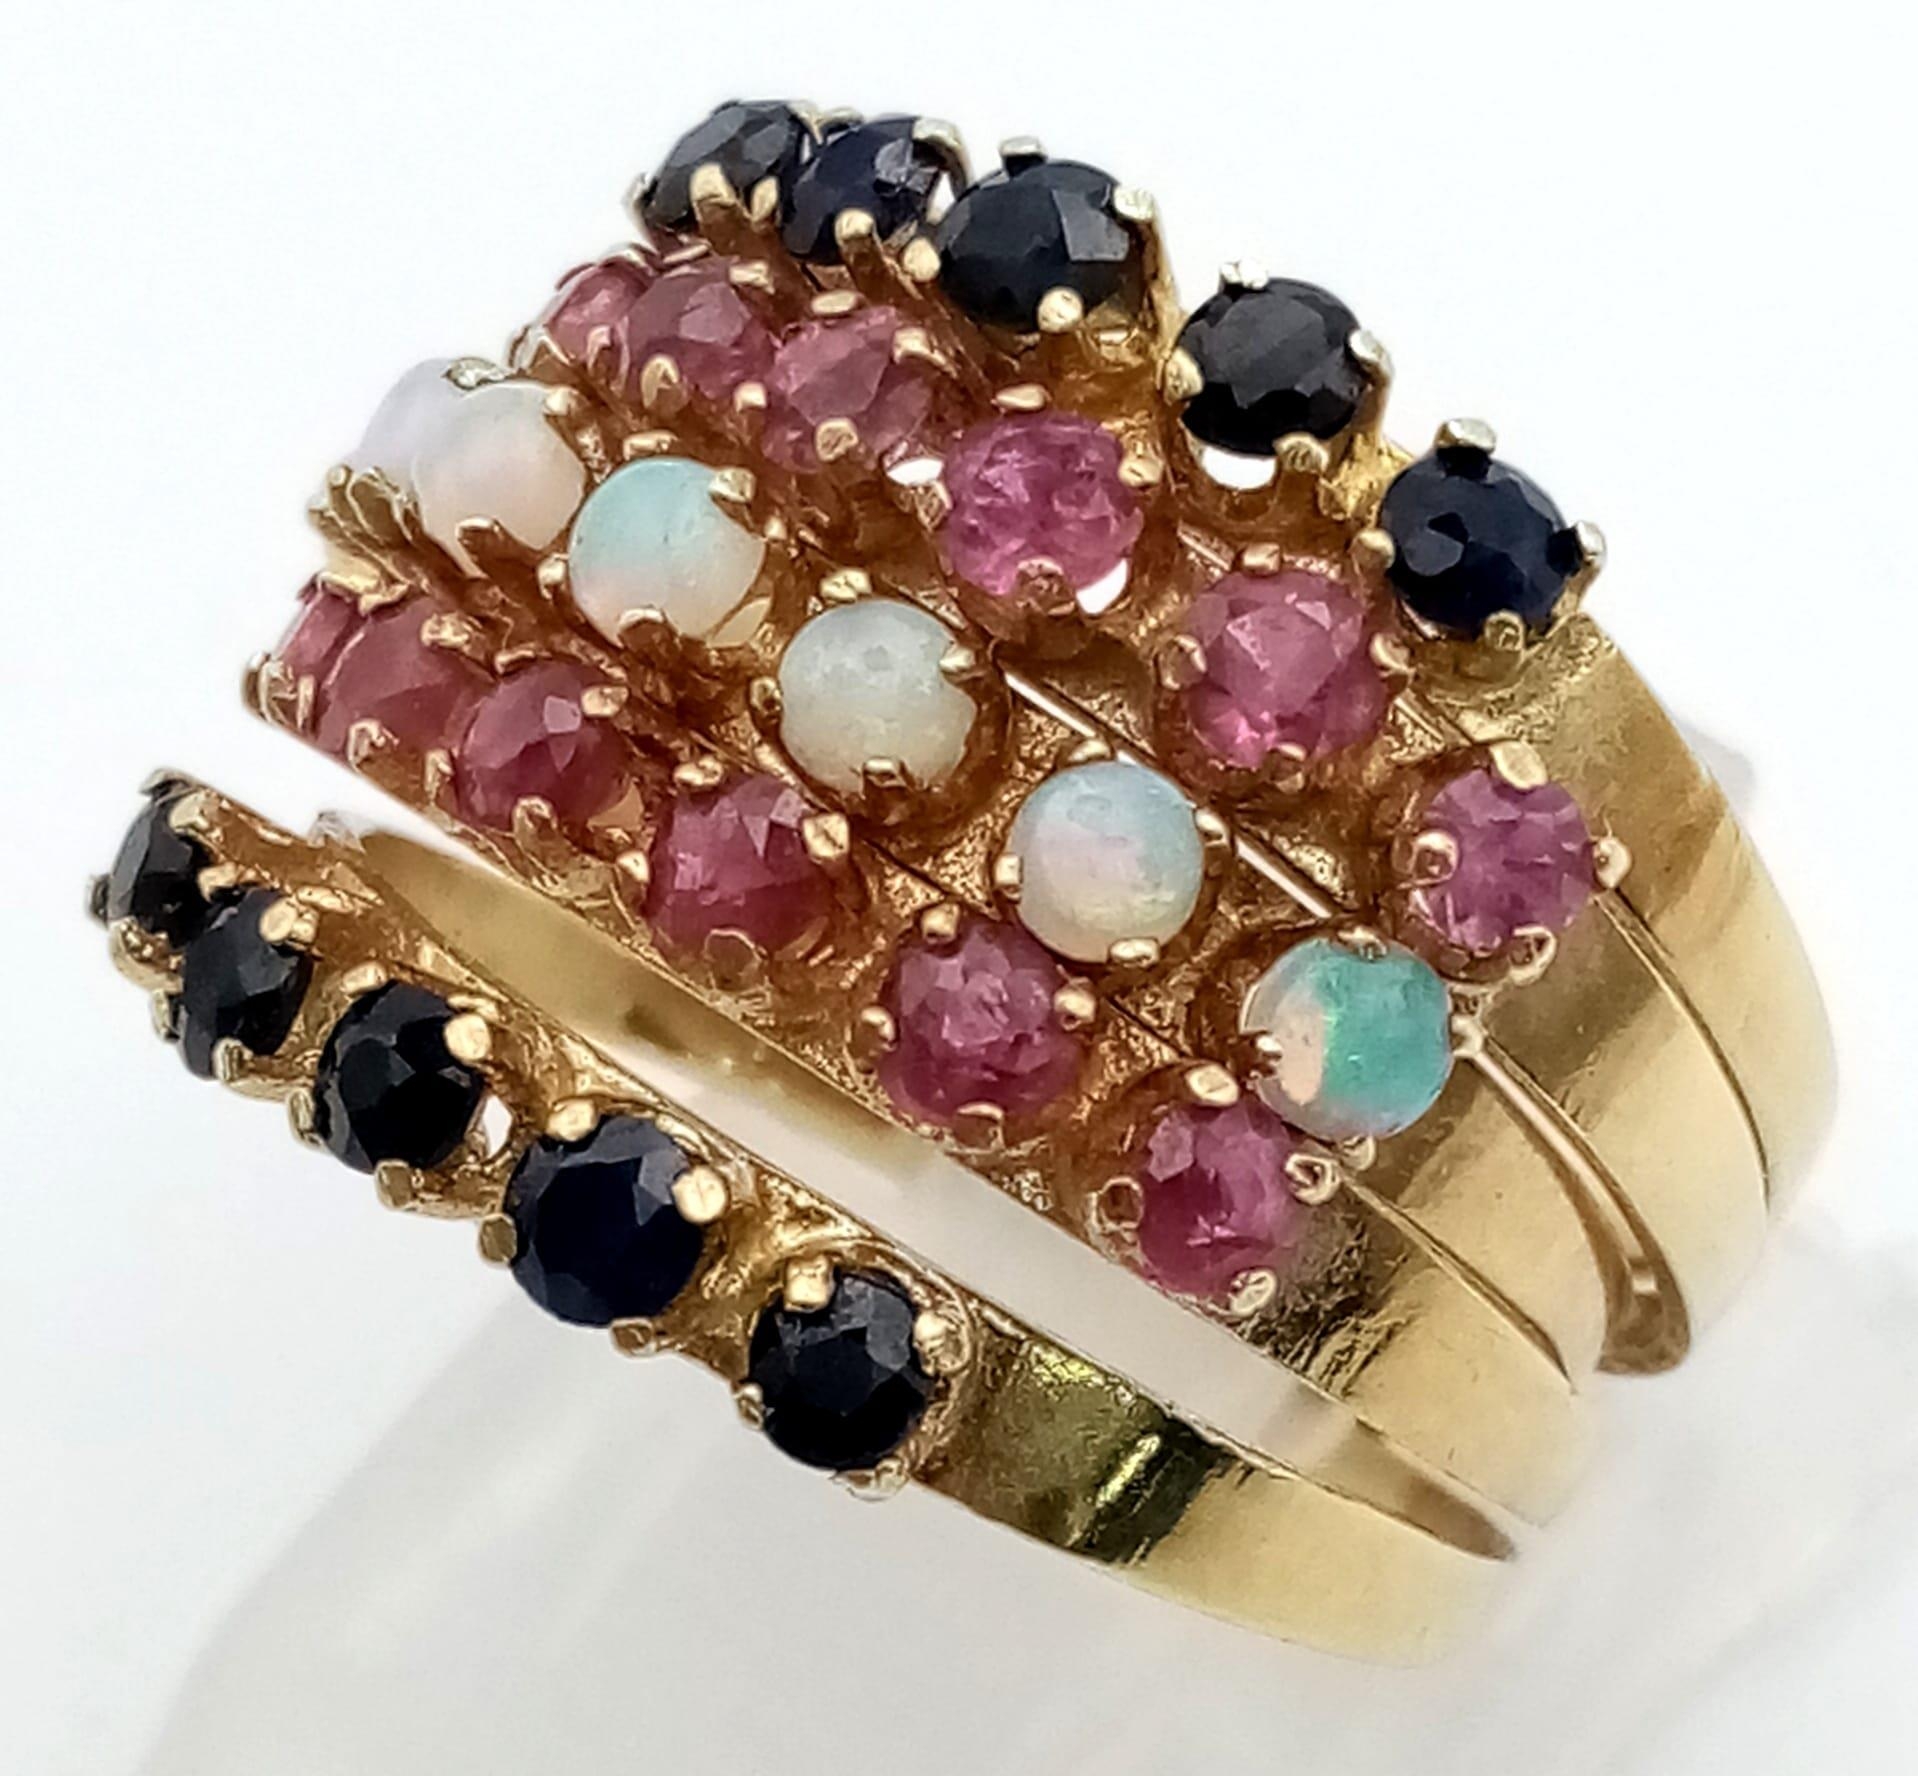 A very unusual 14 K yellow gold five band hinged ring with opals, rubies and sapphires. Ring size: